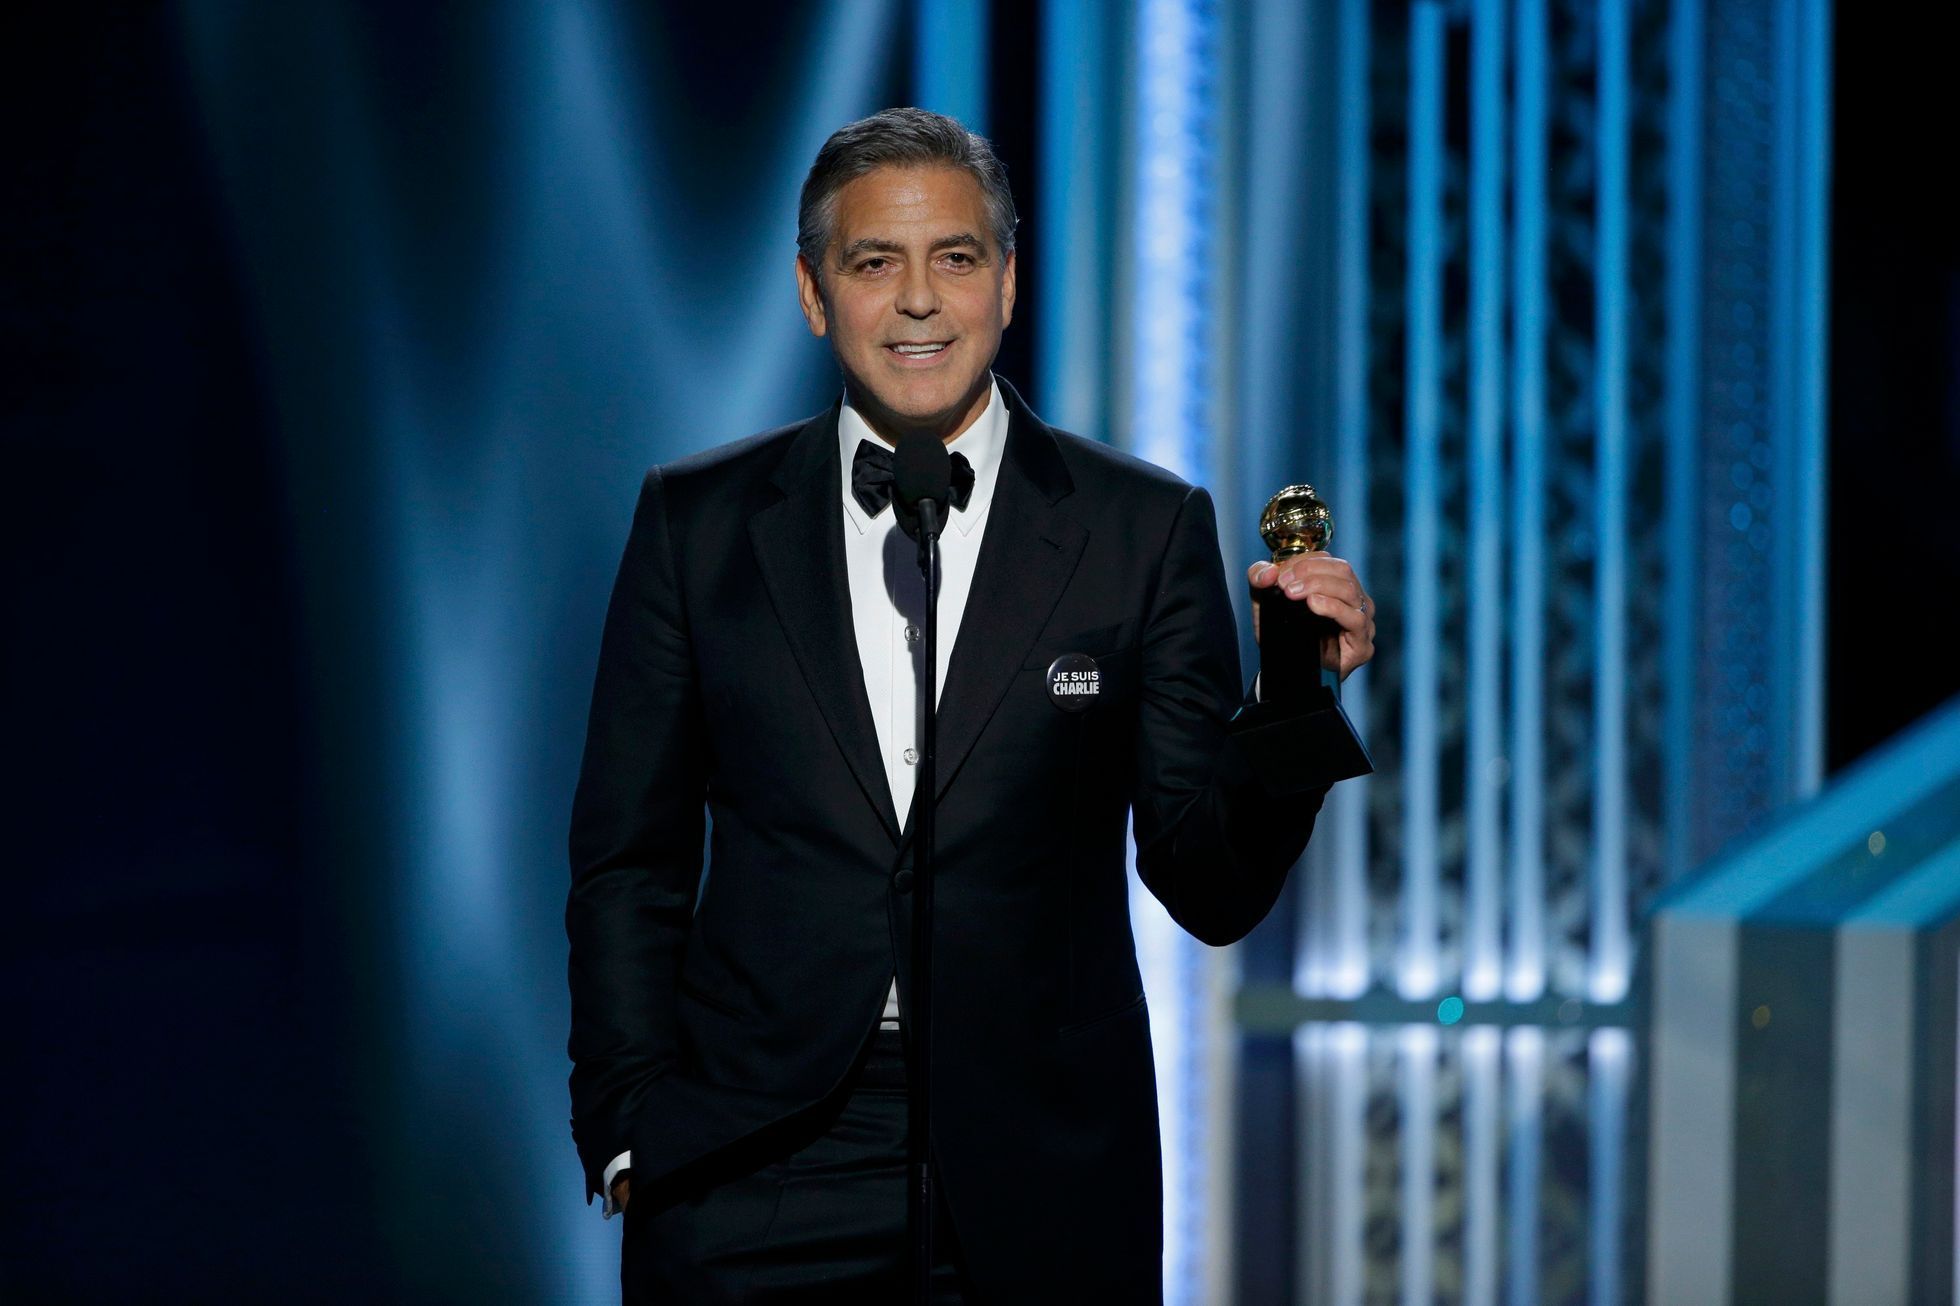 Actor George Clooney accepts the Cecile B. DeMille Award at the 72nd Golden Globe Awards in Beverly Hills